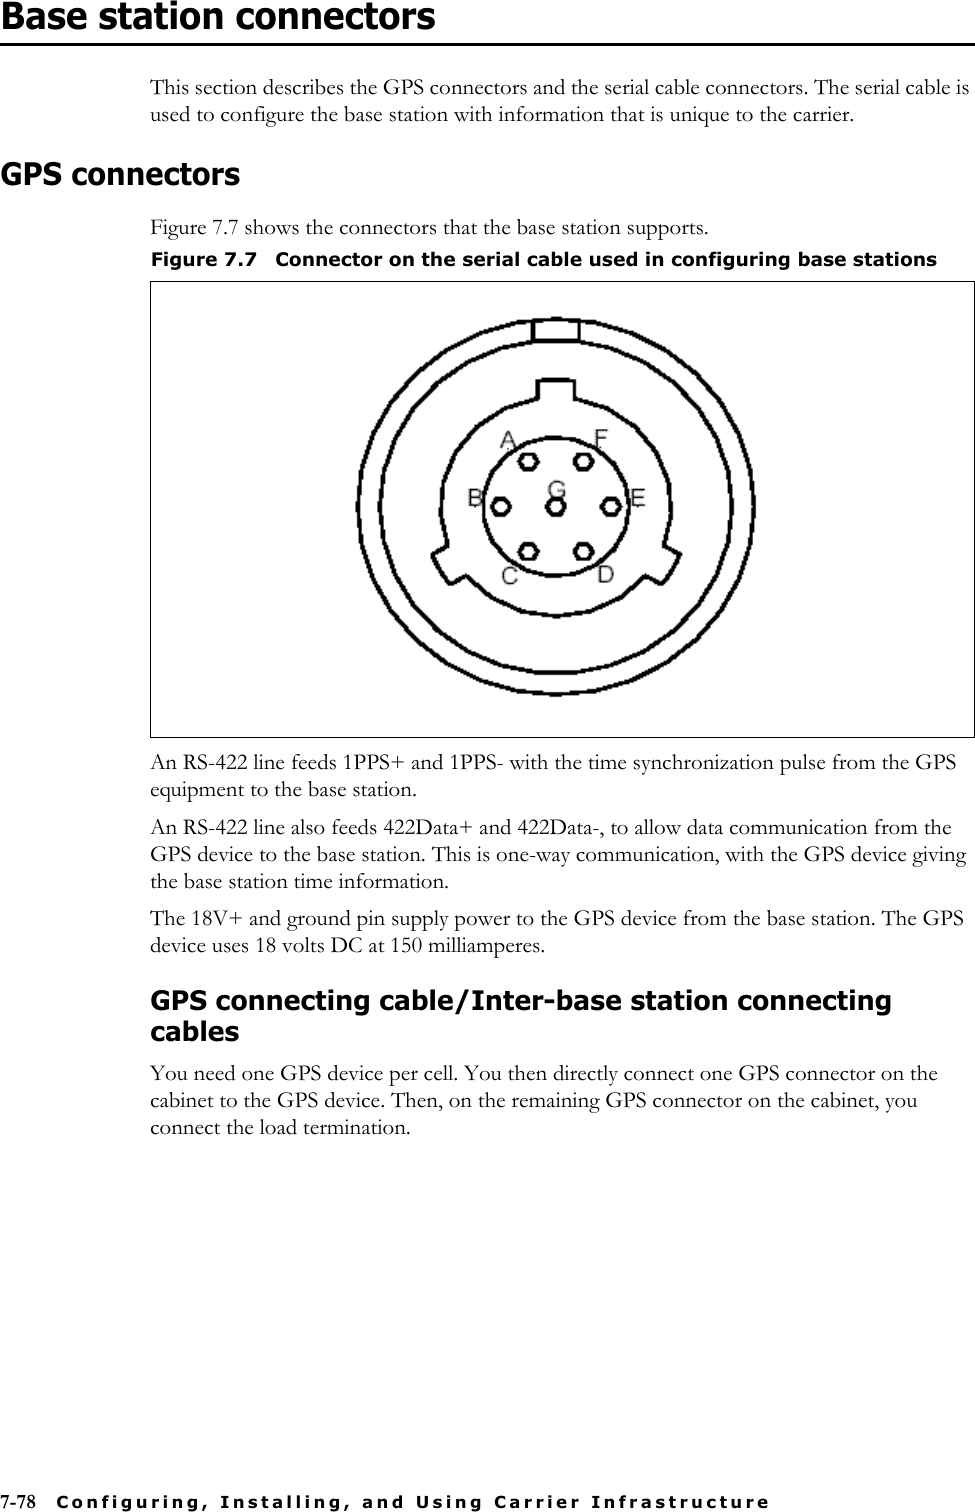 7-78 Configuring, Installing, and Using Carrier InfrastructureBase station connectorsThis section describes the GPS connectors and the serial cable connectors. The serial cable is used to configure the base station with information that is unique to the carrier. GPS connectorsFigure 7.7 shows the connectors that the base station supports.An RS-422 line feeds 1PPS+ and 1PPS- with the time synchronization pulse from the GPS equipment to the base station. An RS-422 line also feeds 422Data+ and 422Data-, to allow data communication from the GPS device to the base station. This is one-way communication, with the GPS device giving the base station time information. The 18V+ and ground pin supply power to the GPS device from the base station. The GPS device uses 18 volts DC at 150 milliamperes.GPS connecting cable/Inter-base station connecting cablesYou need one GPS device per cell. You then directly connect one GPS connector on the cabinet to the GPS device. Then, on the remaining GPS connector on the cabinet, you connect the load termination.Figure 7.7 Connector on the serial cable used in configuring base stations